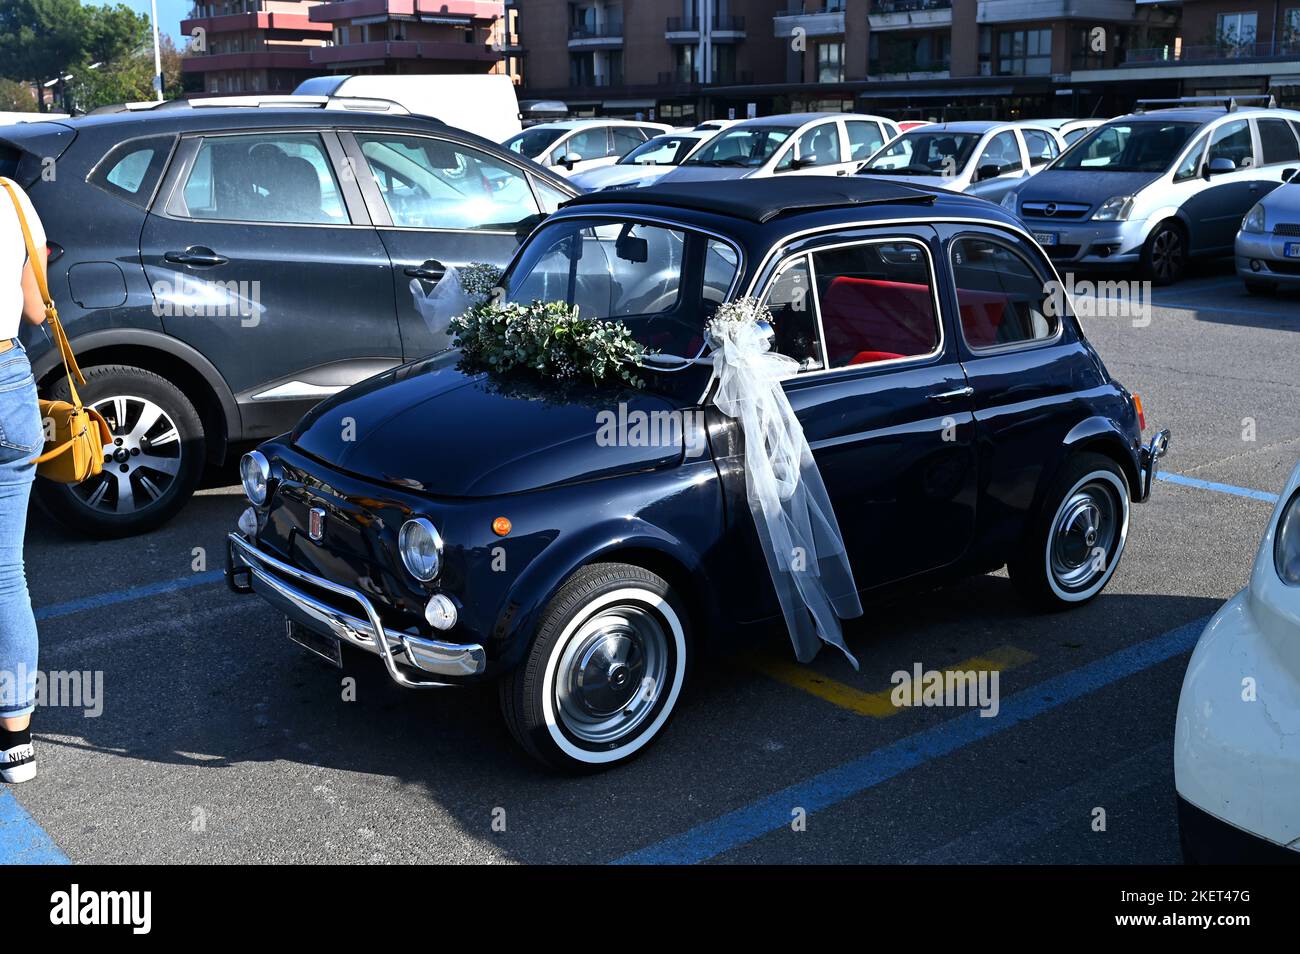 Fiat 500 model. This vintage car about 1970 is still an icon of a piece of Italian automotive history and customs. Used here for a wedding. Stock Photo